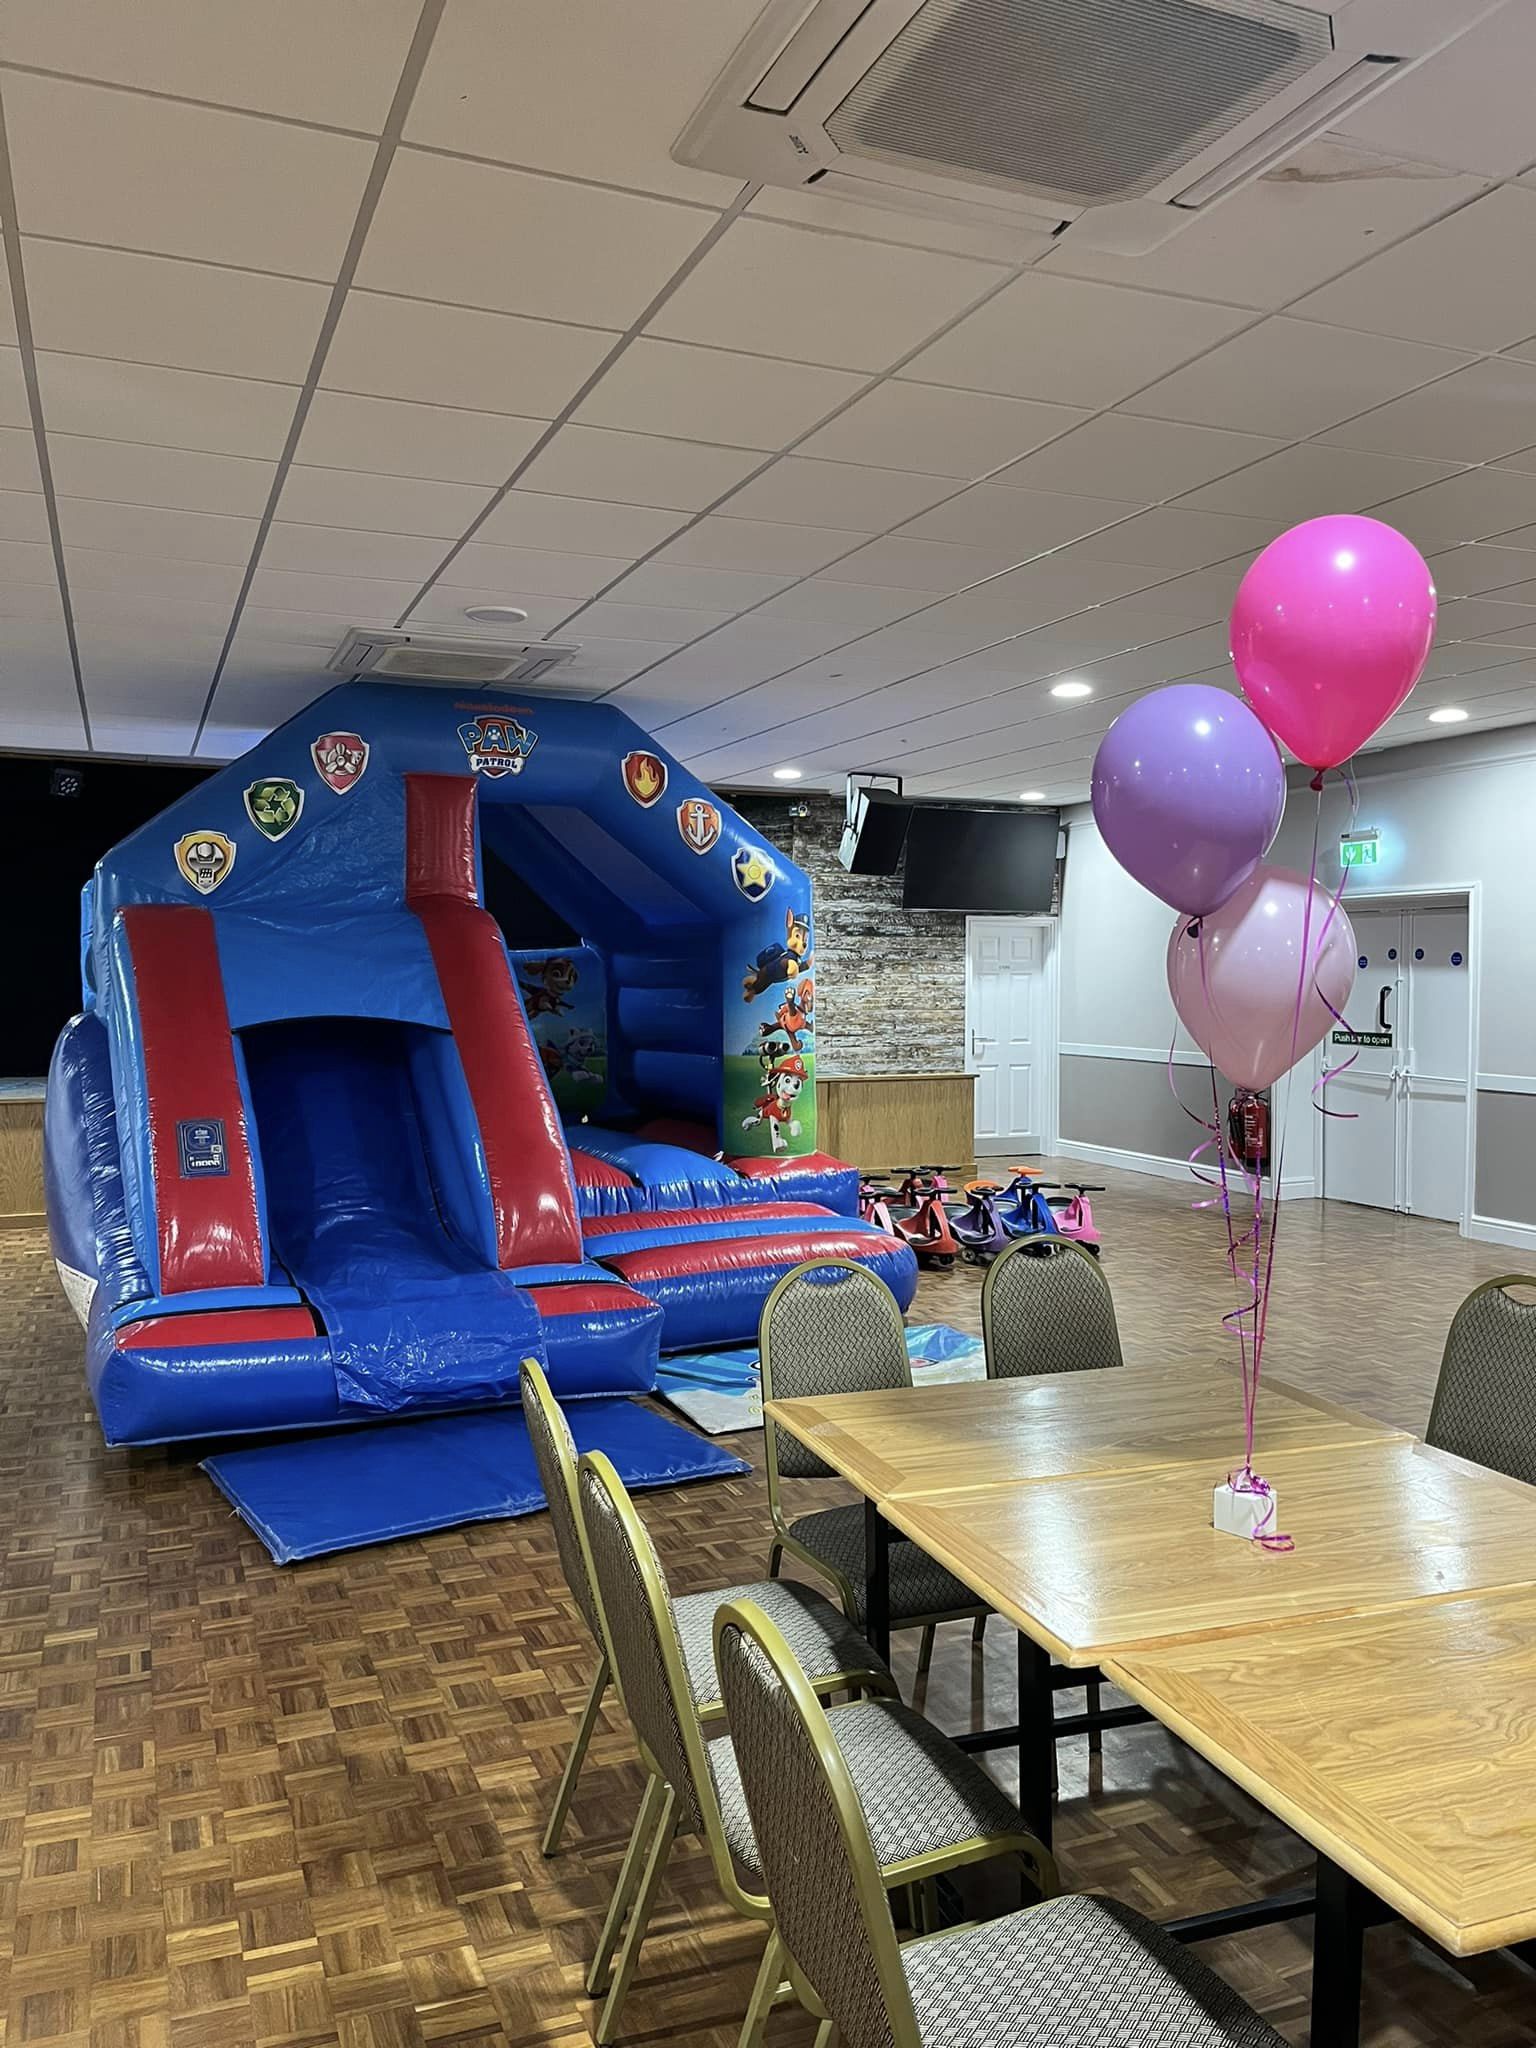 A Paw Patrol themed bouncy castle and slide combo